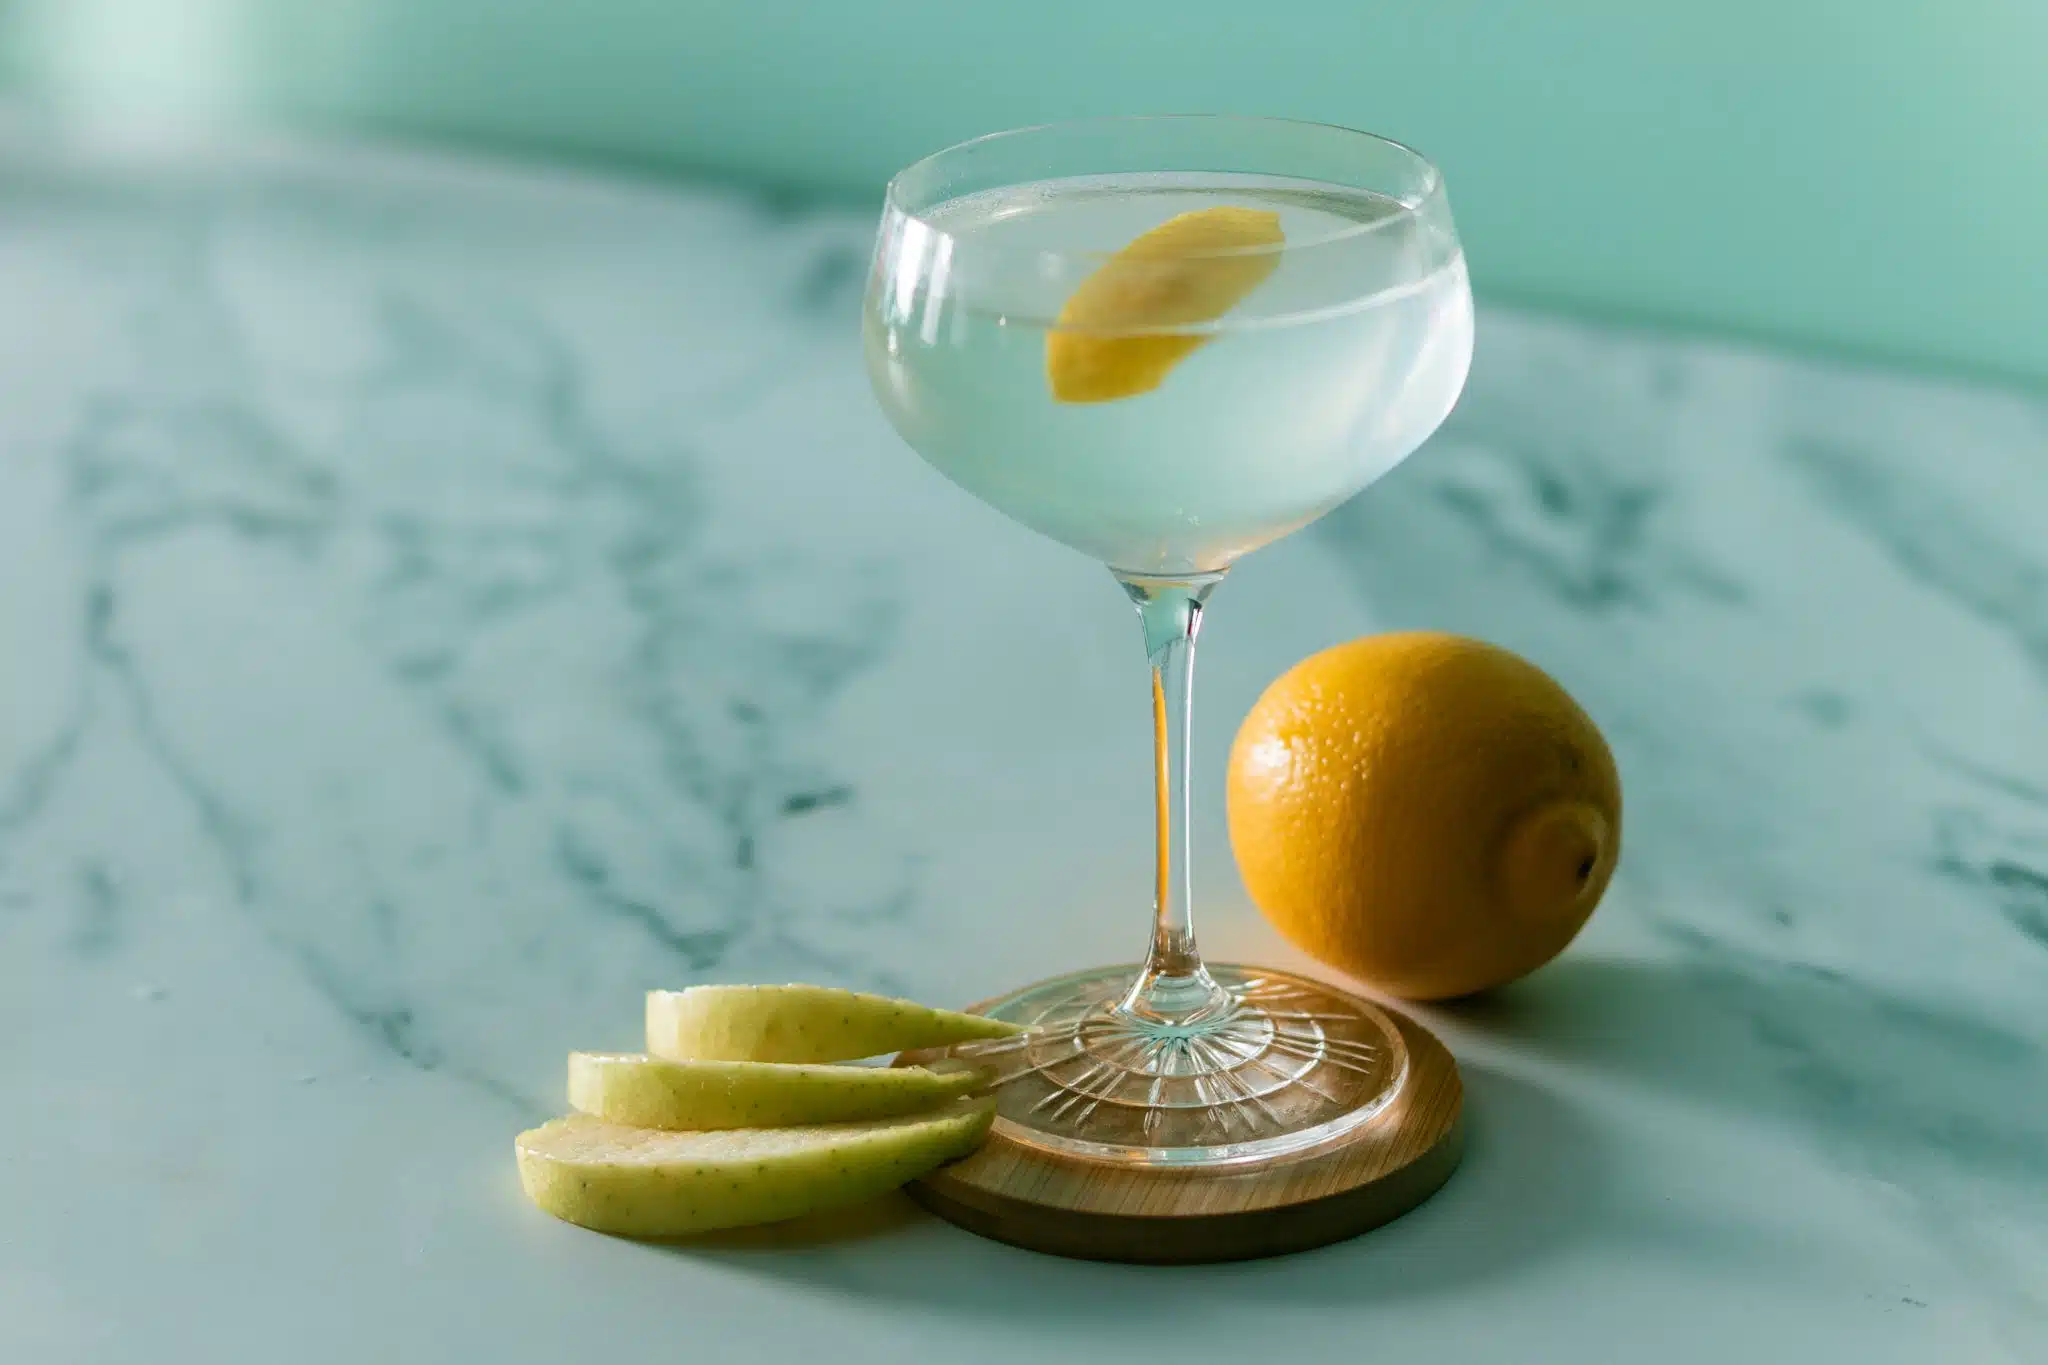 A side shot of an Apple Martini cocktail in a martini glass on a brown coaster with three apple slices and a lemon on the side, placed on a white marmol table.